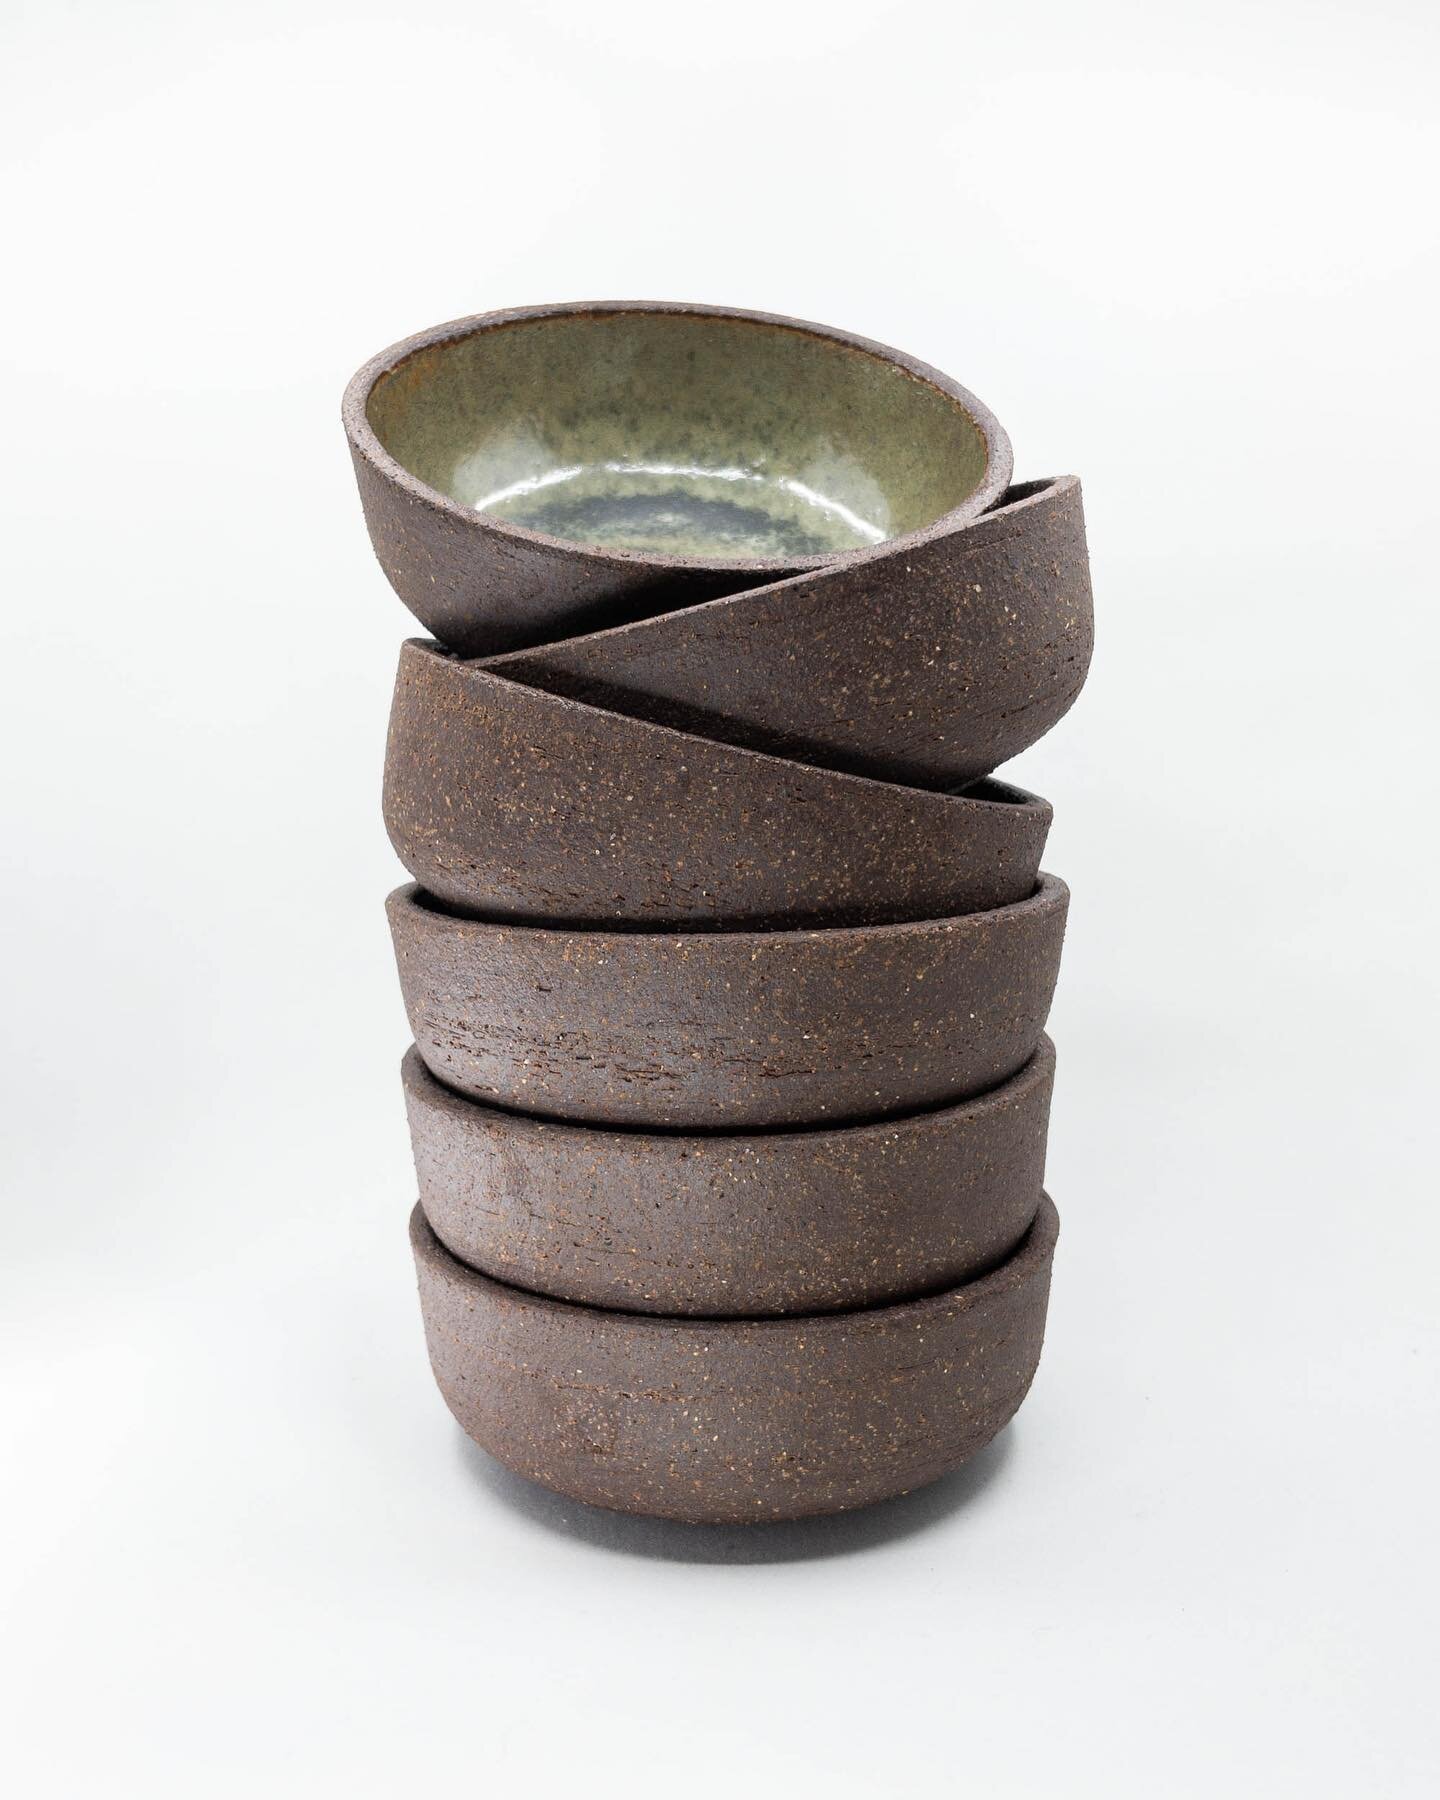 Set of 6 small bowls. Made from red  stoneware with a green glaze on the interior surfaces, reduction fired to cone 10. They shrunk a little more than I expected, but this felt like a bit of a breakthrough for me in terms of throwing a relatively con